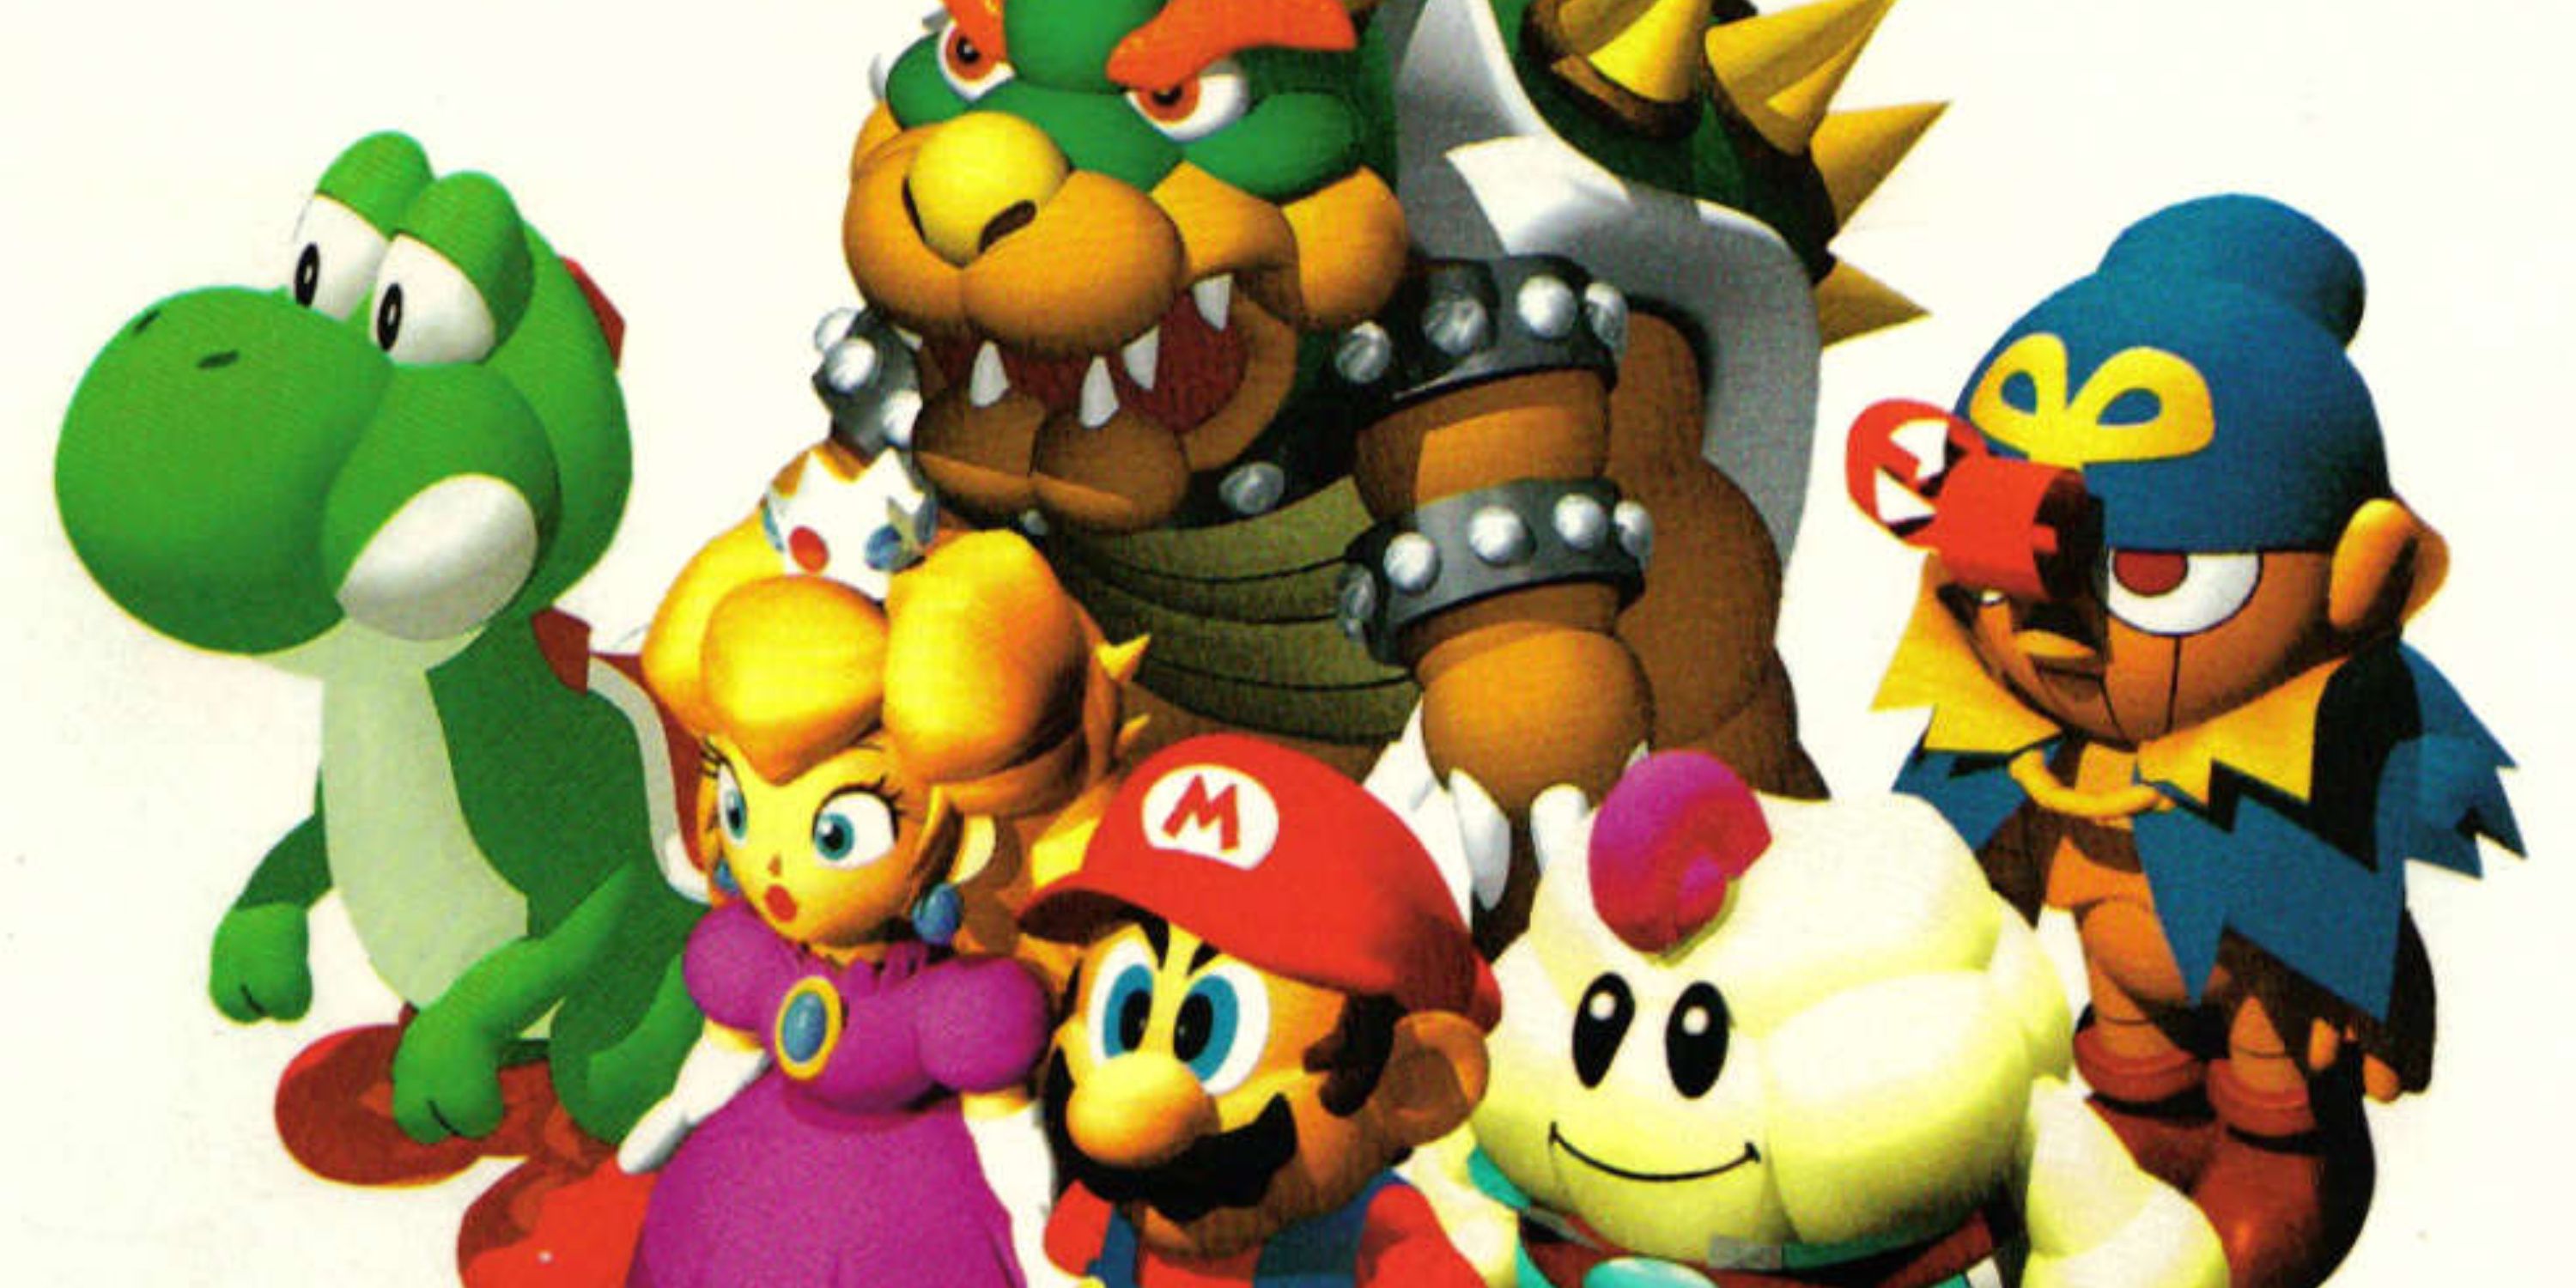 Mario in a party with several characters from the franchise